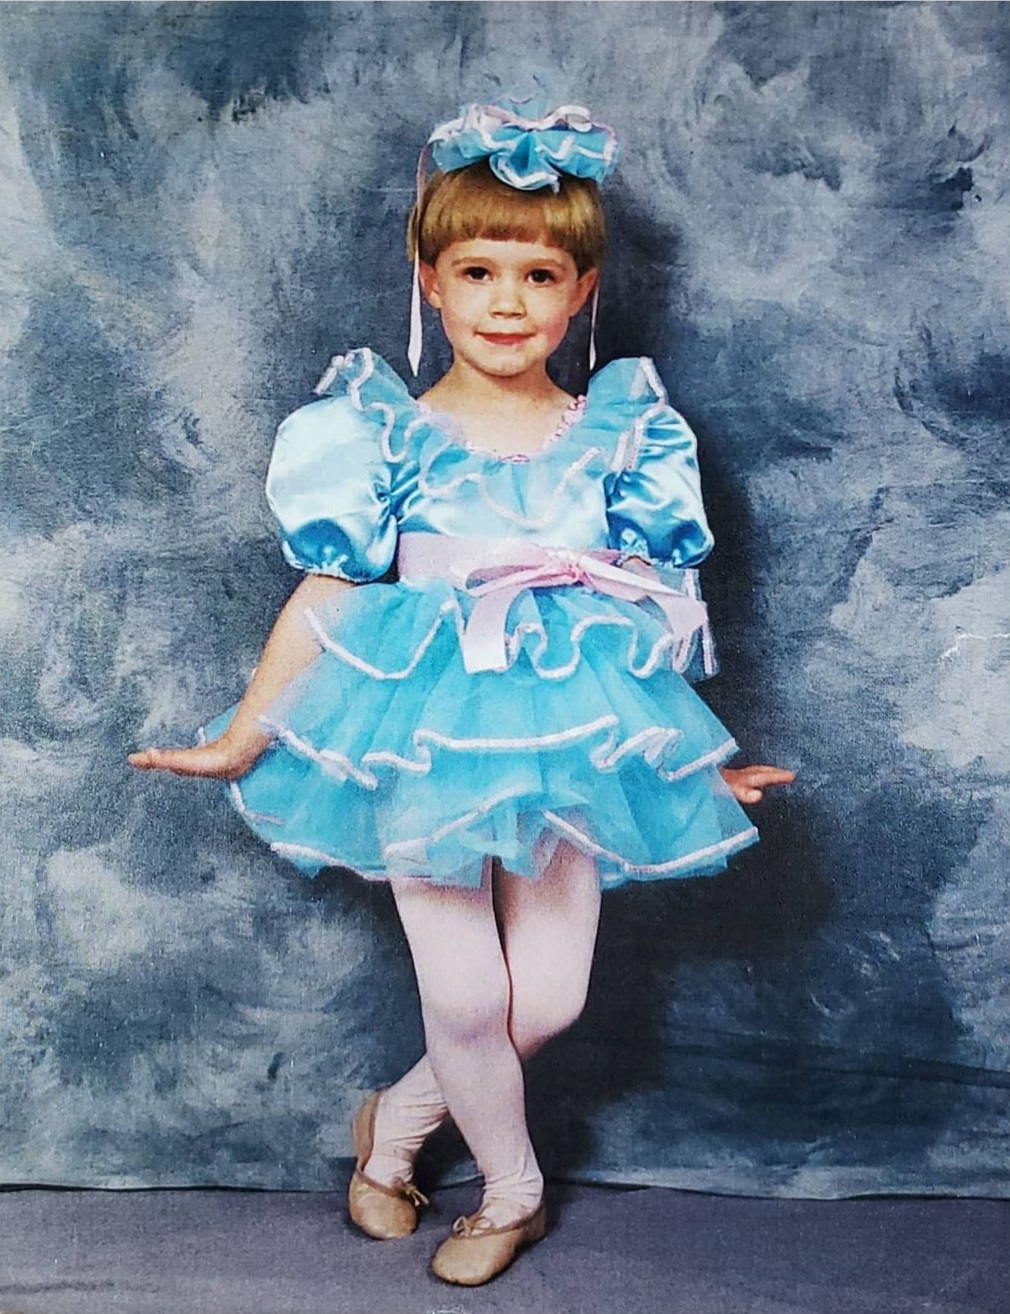 The author Julia Davidson as a young dancer, in a blue tutu, curtseying and looking straight at the camera.